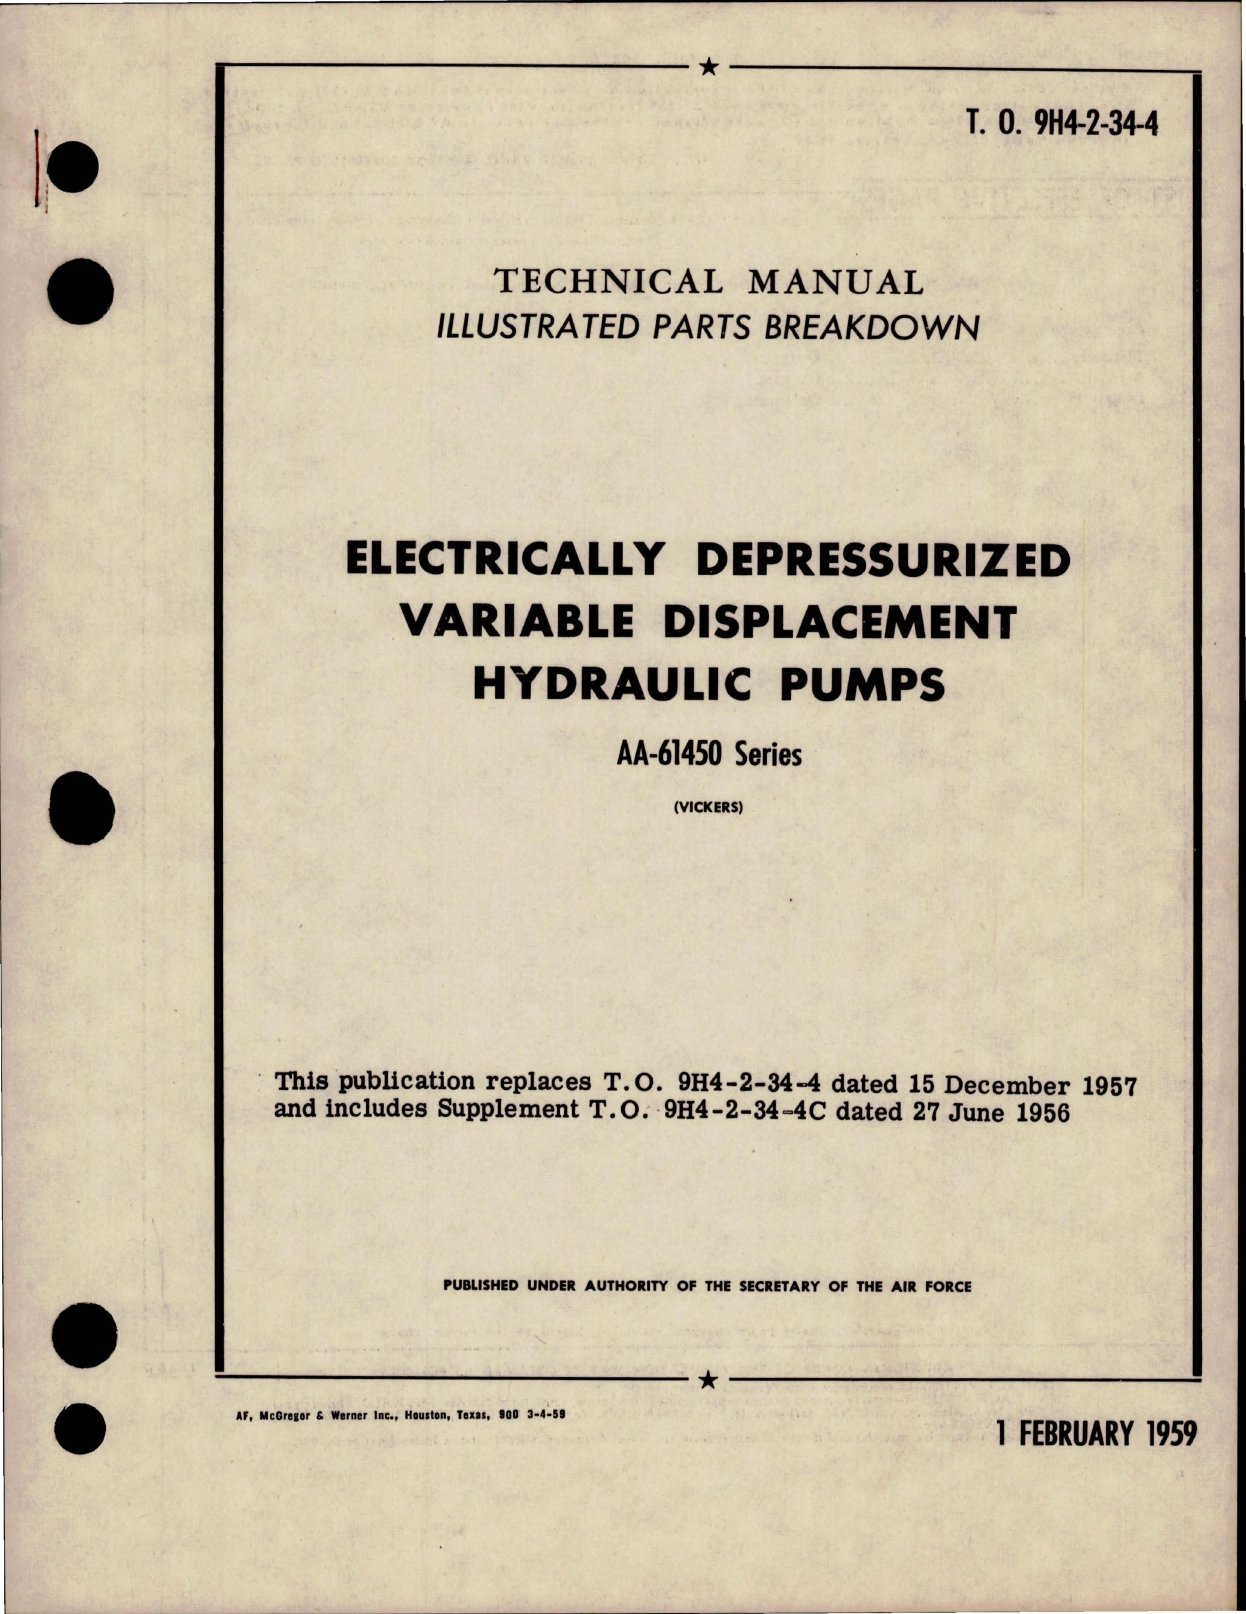 Sample page 1 from AirCorps Library document: Illustrated Parts Breakdown for Electrically Depressurized Variable Displacement Hydraulic Pumps - AA-61450 Series 